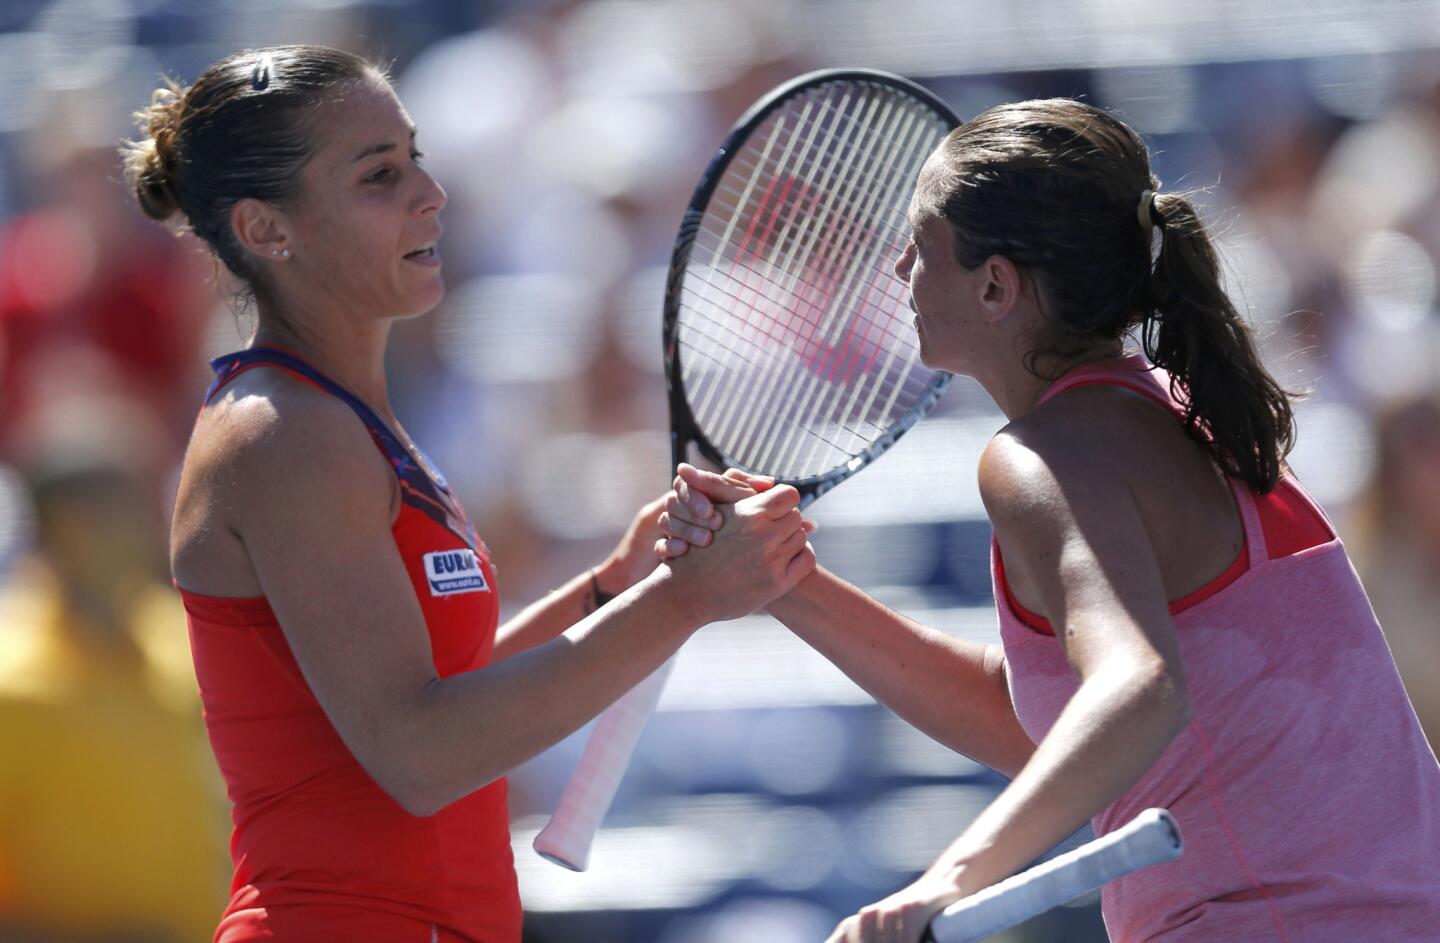 Flavia Pennetta and Roberta Vinci of Italy